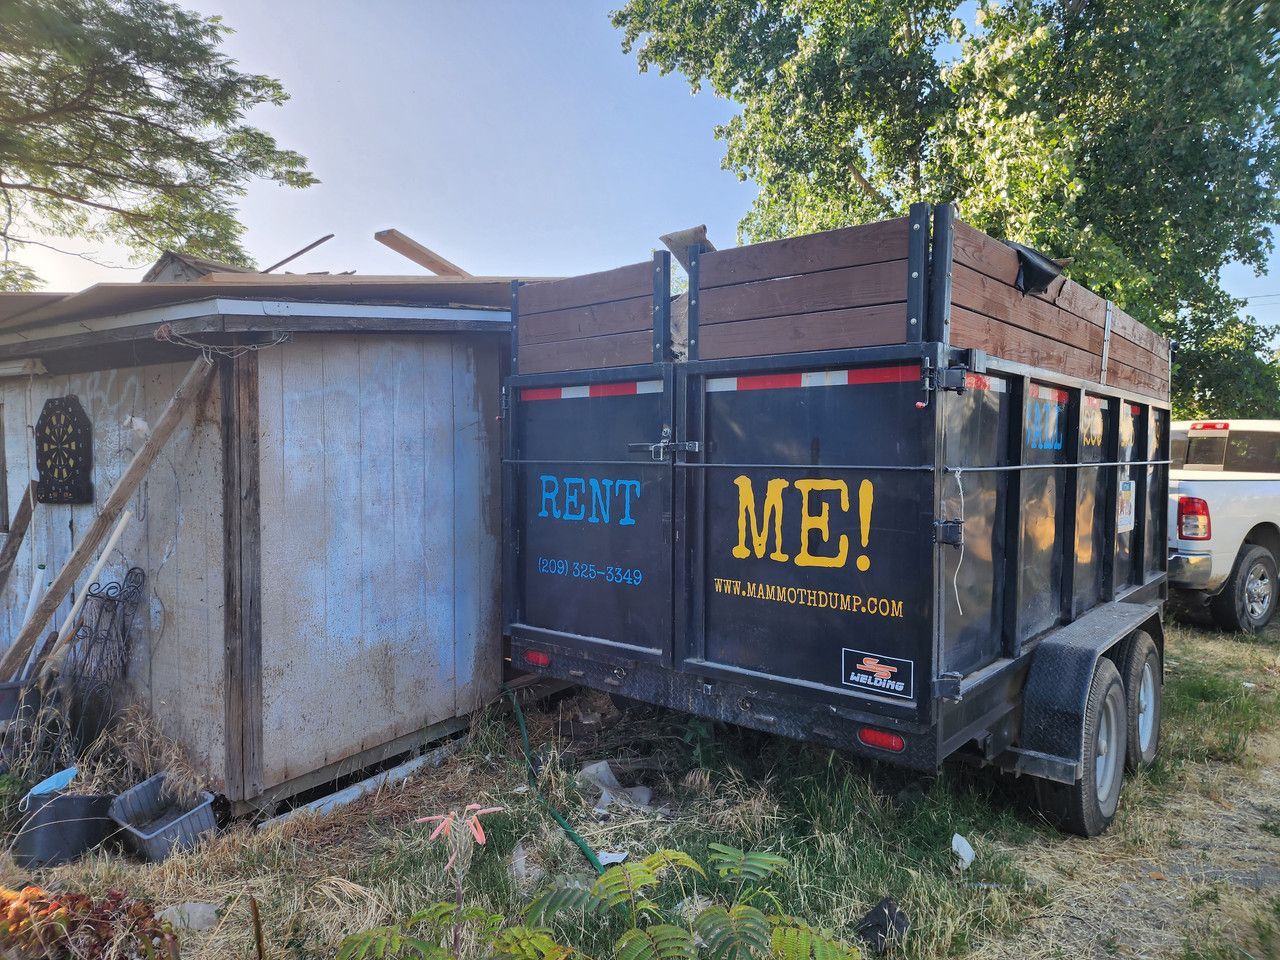 20-yard dumpster parked beside a home in Merced, CA, utilized for efficient disposal of materials from a roofing job.